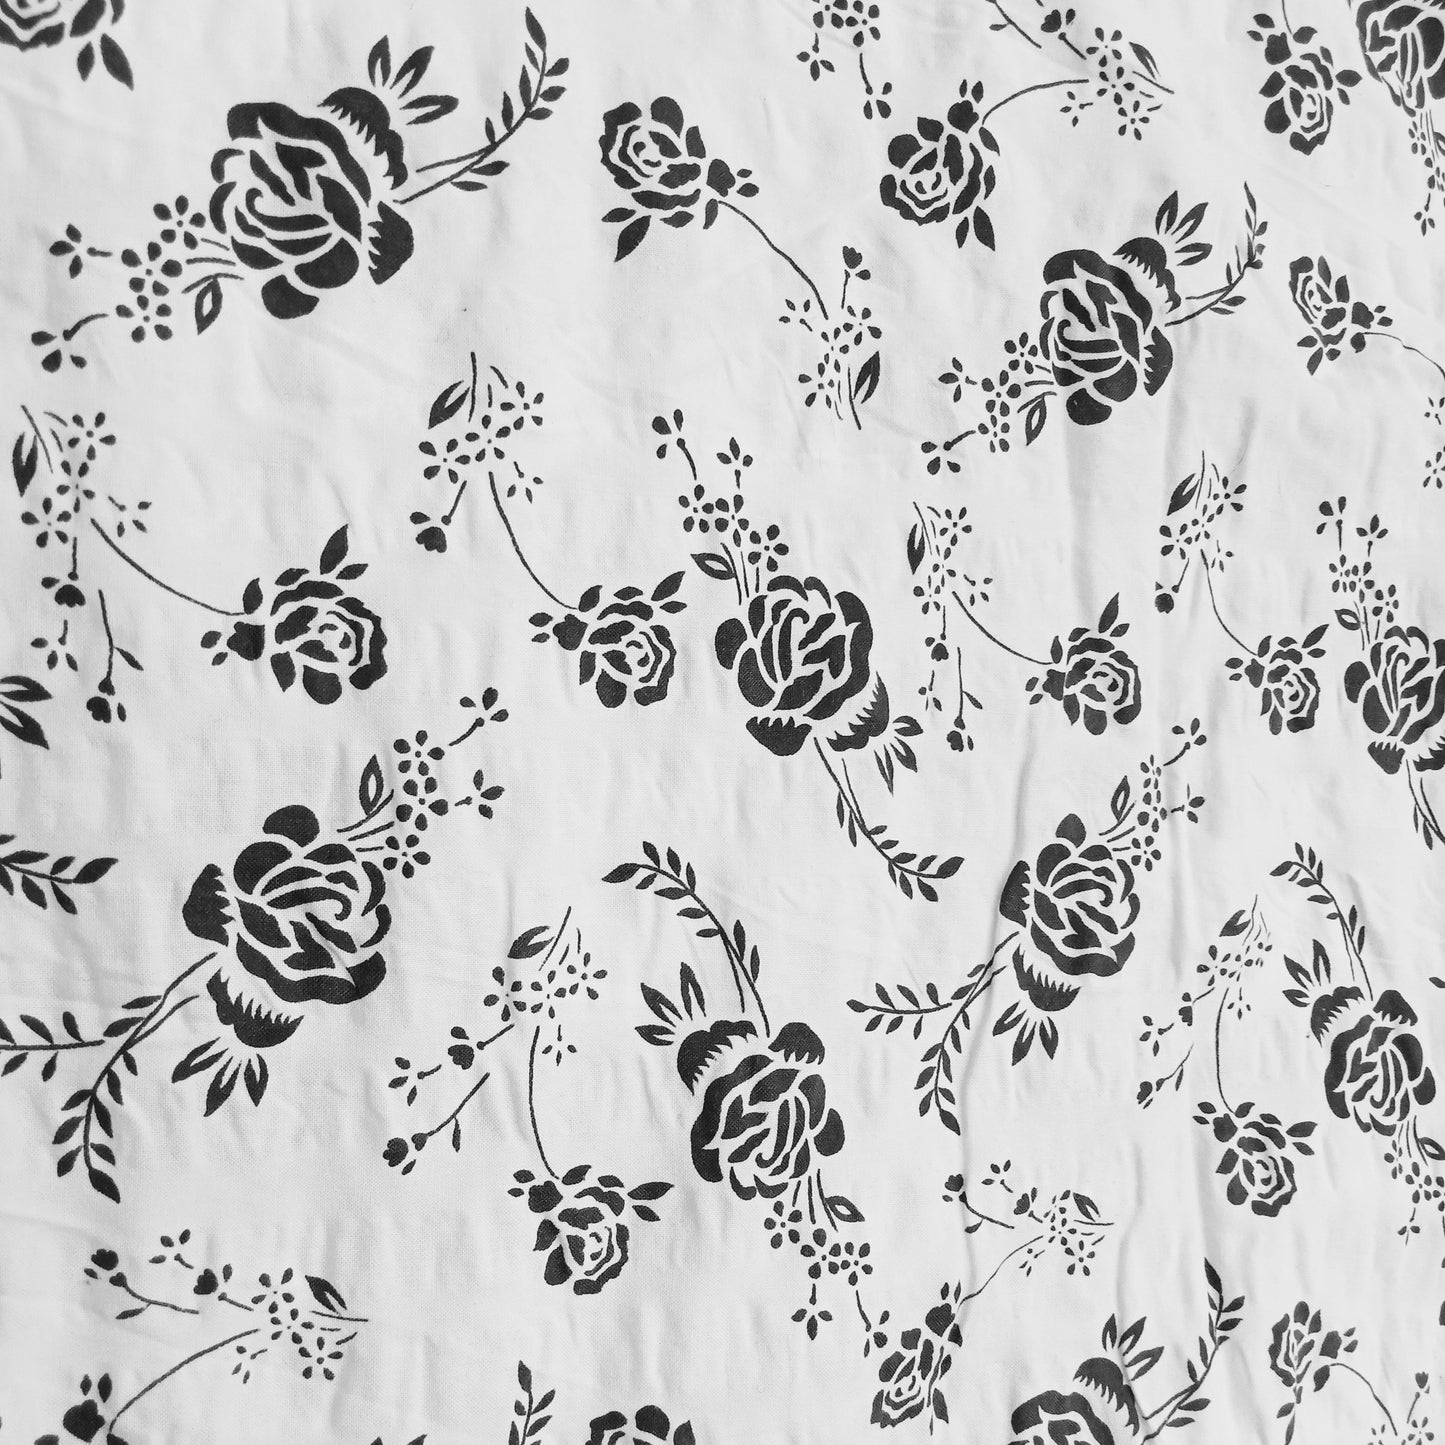 Black & white floral printed fabric - 2mtrs